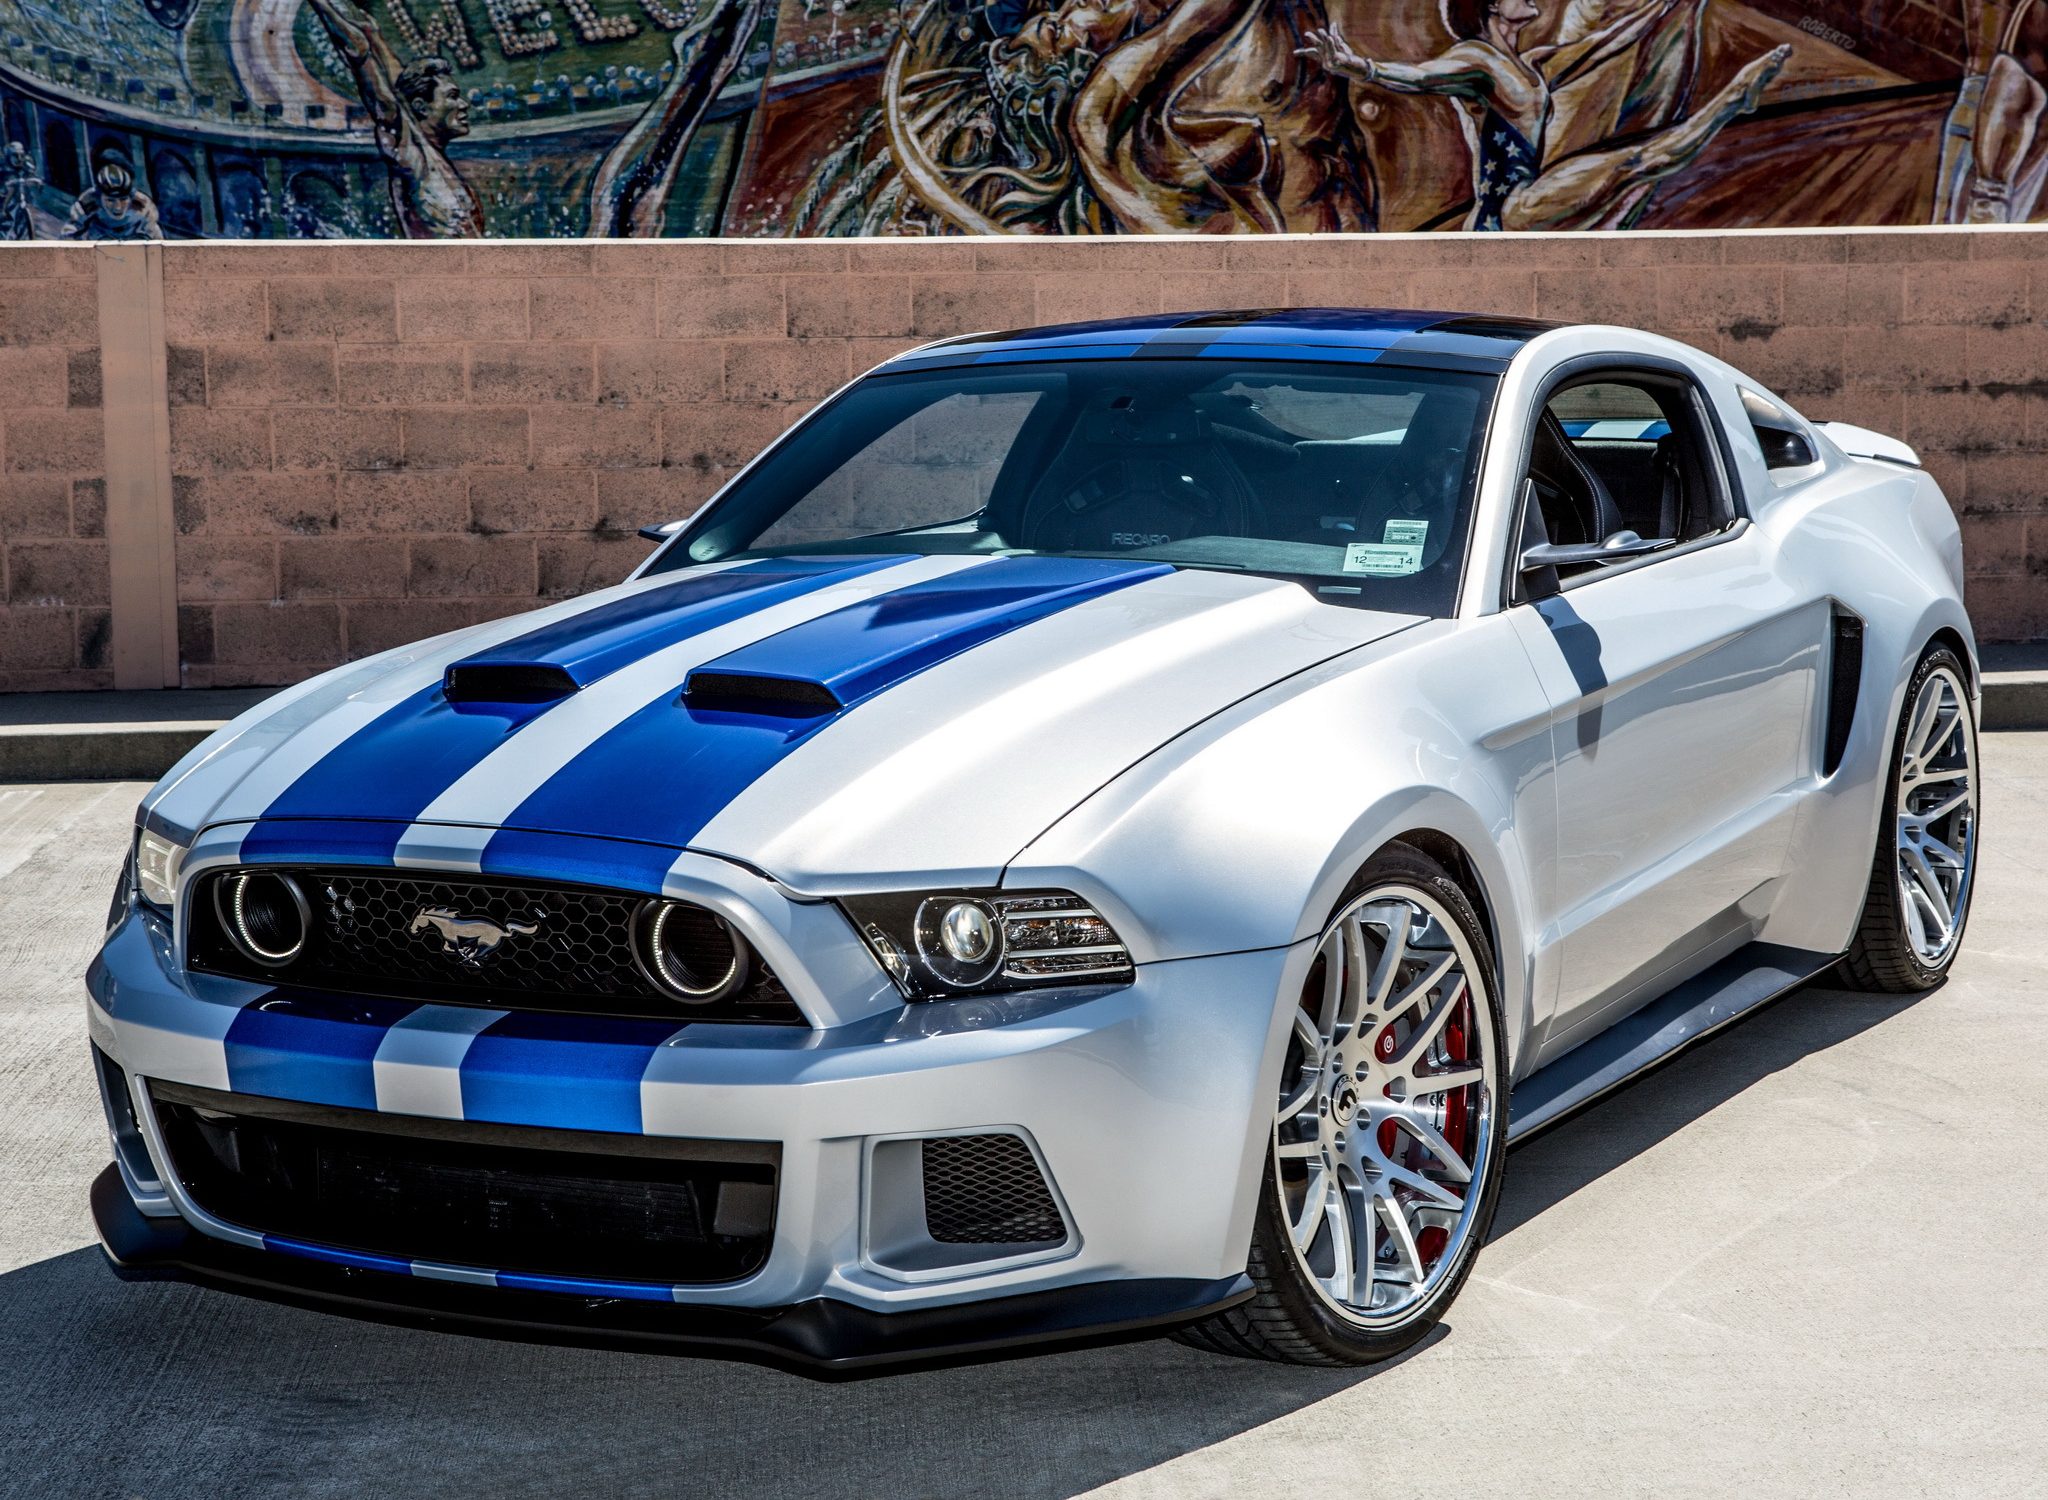 Mustang Of The Day: 2014 Ford Mustang GT Need For Speed